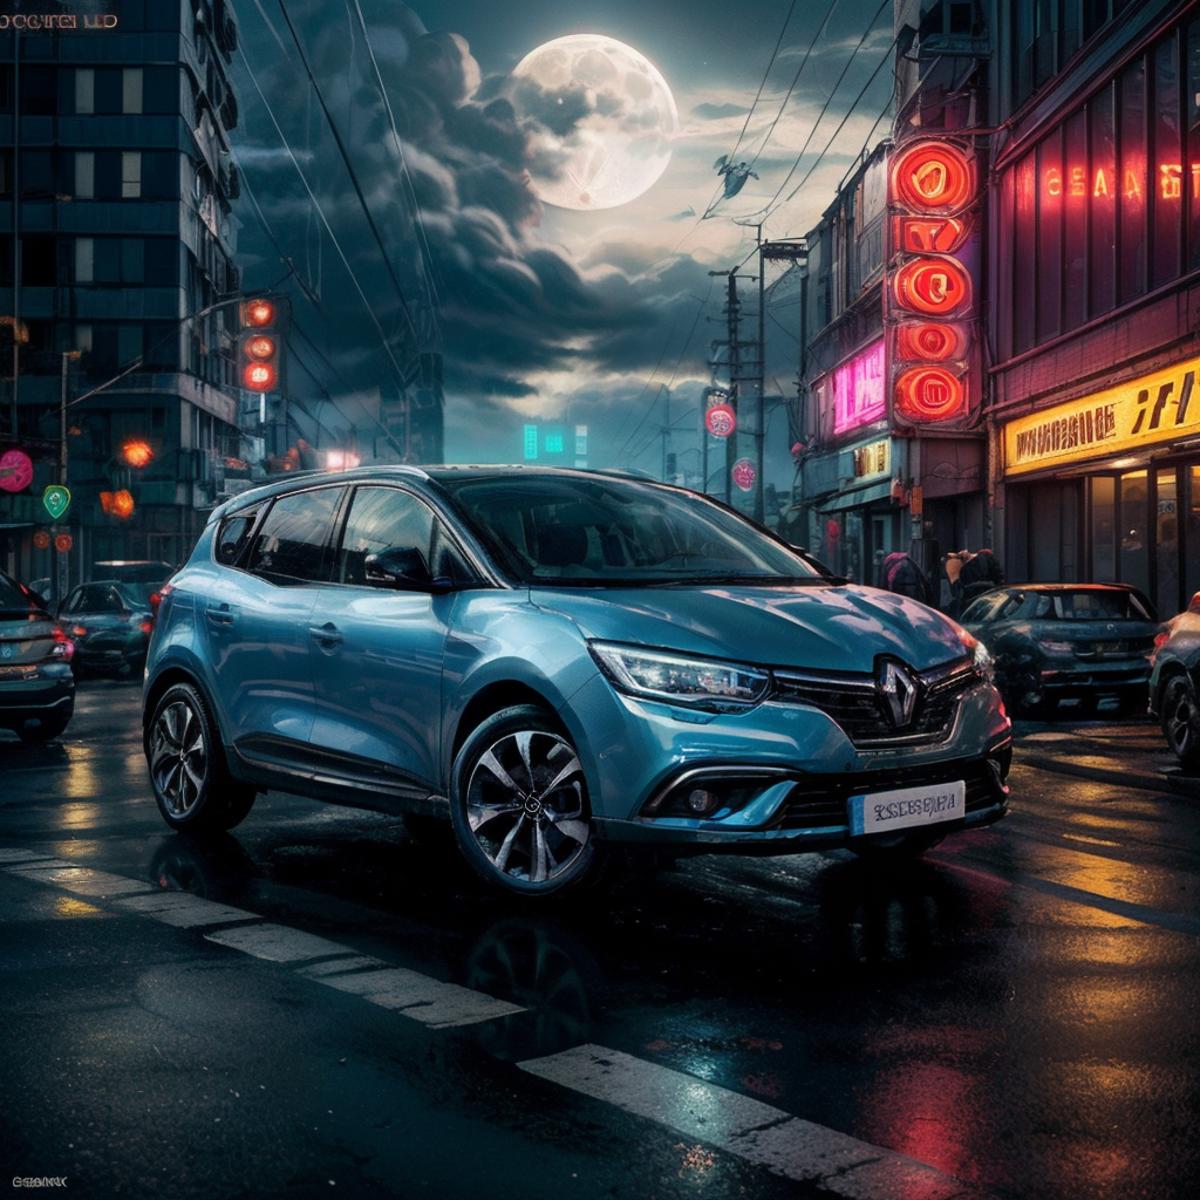 Renault Scenic 2016 image by CappyAdams